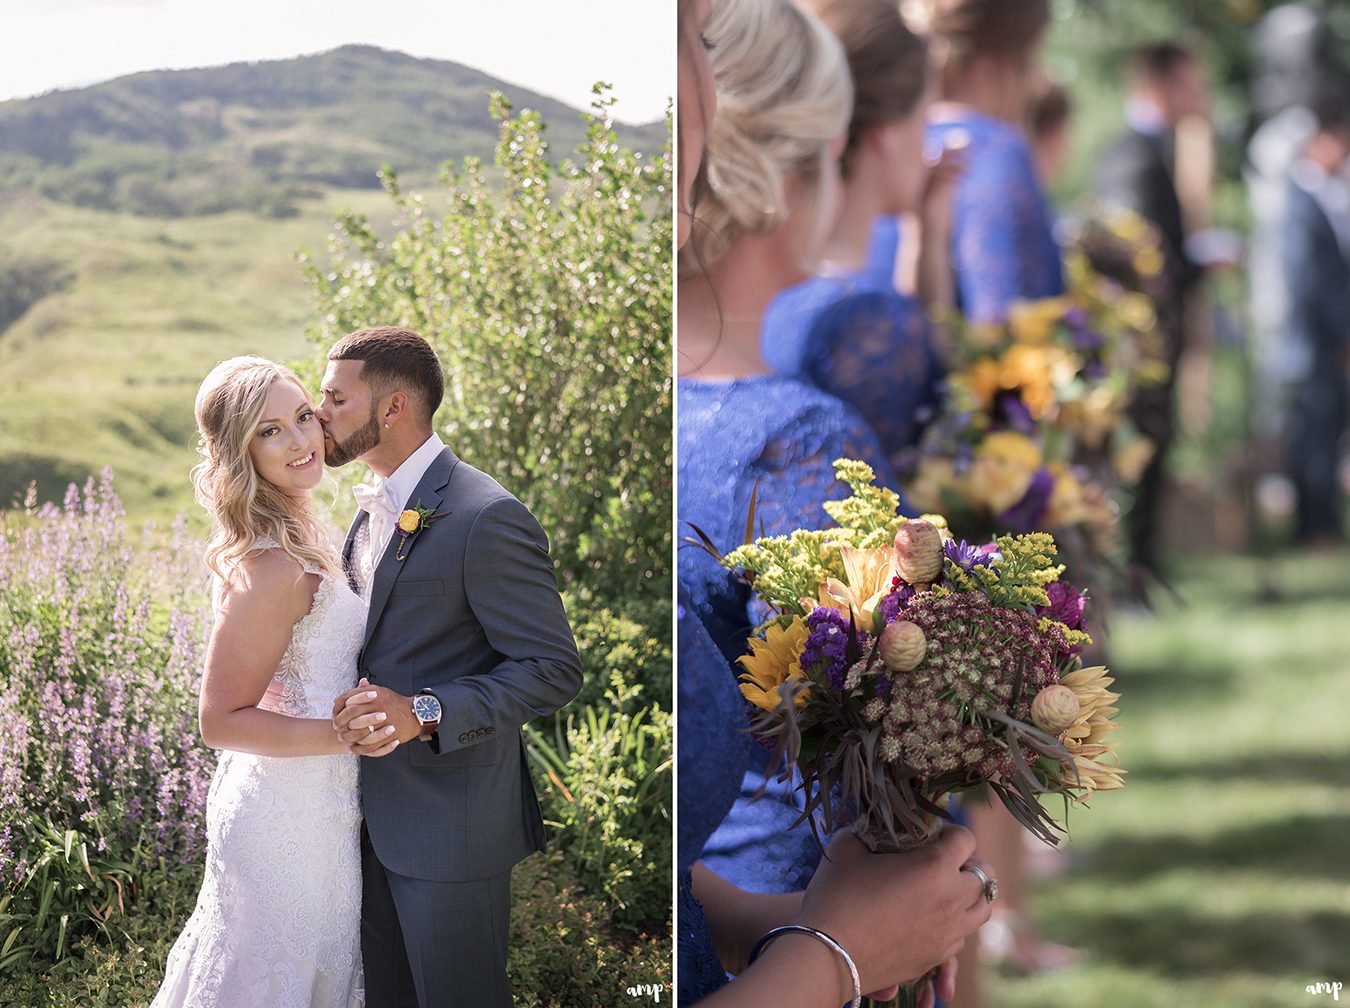 Bride and groom kiss in the Crested Butte Mountain Wedding Garden among the wildflowers